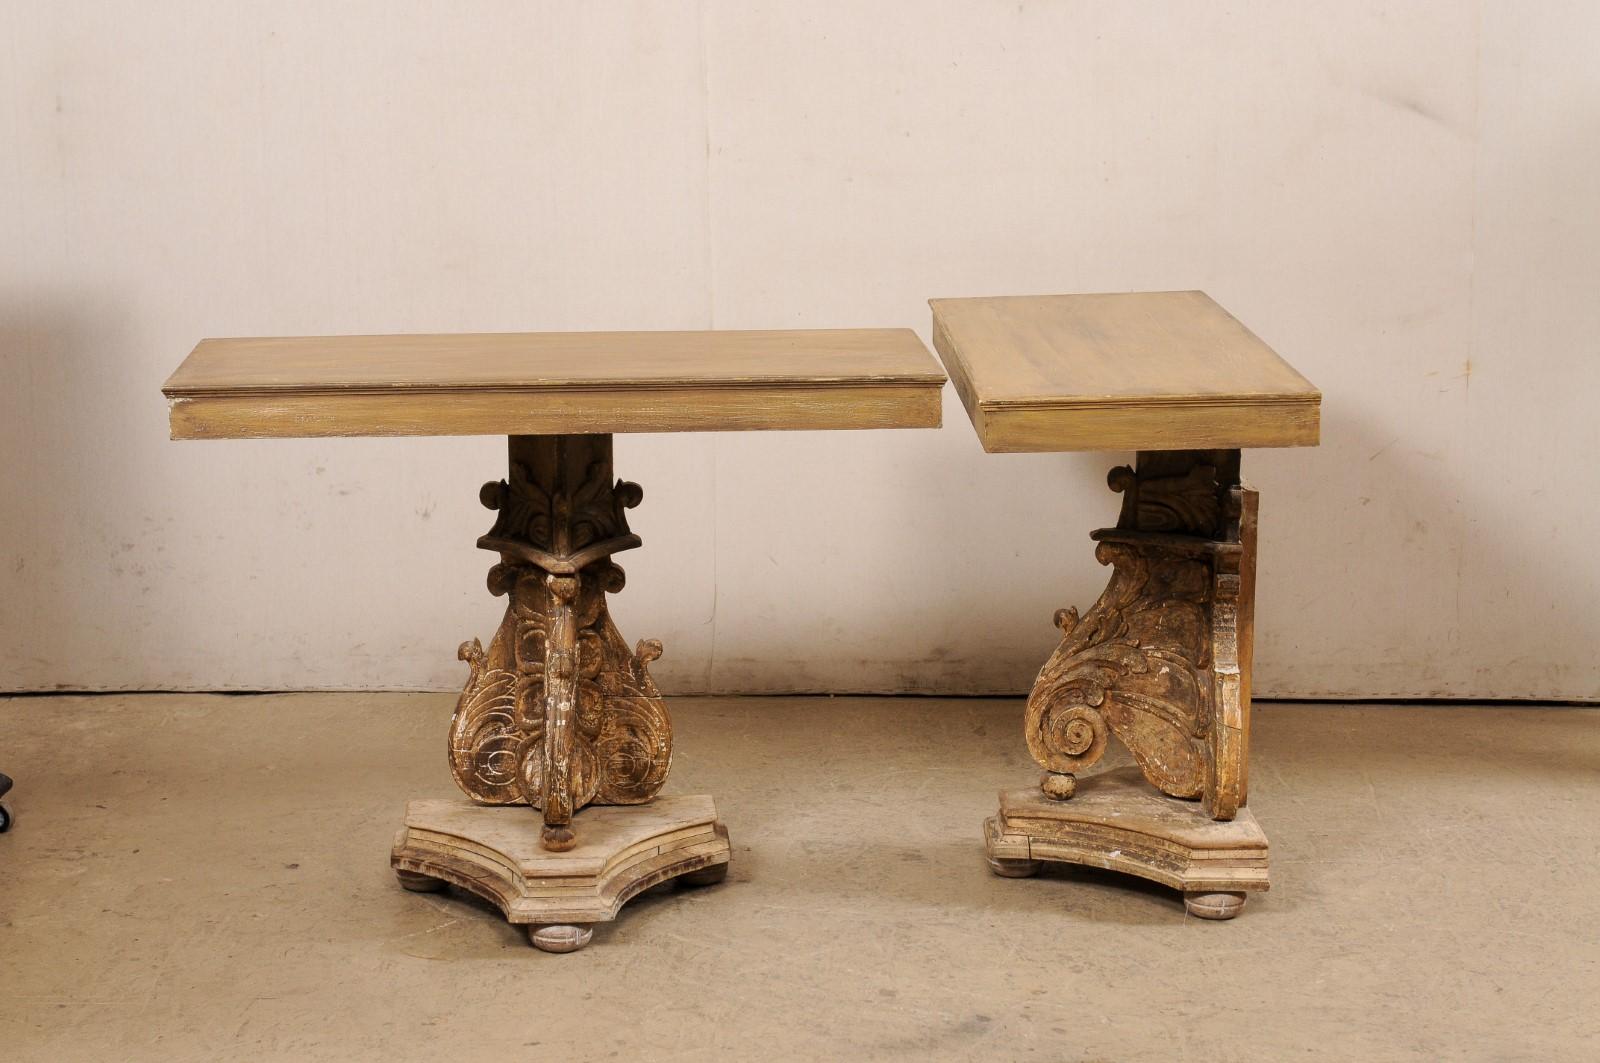 Italian Pair of Wall Consoles Raised on Carved-Wood Late 18th C. Pedestal Bases For Sale 7